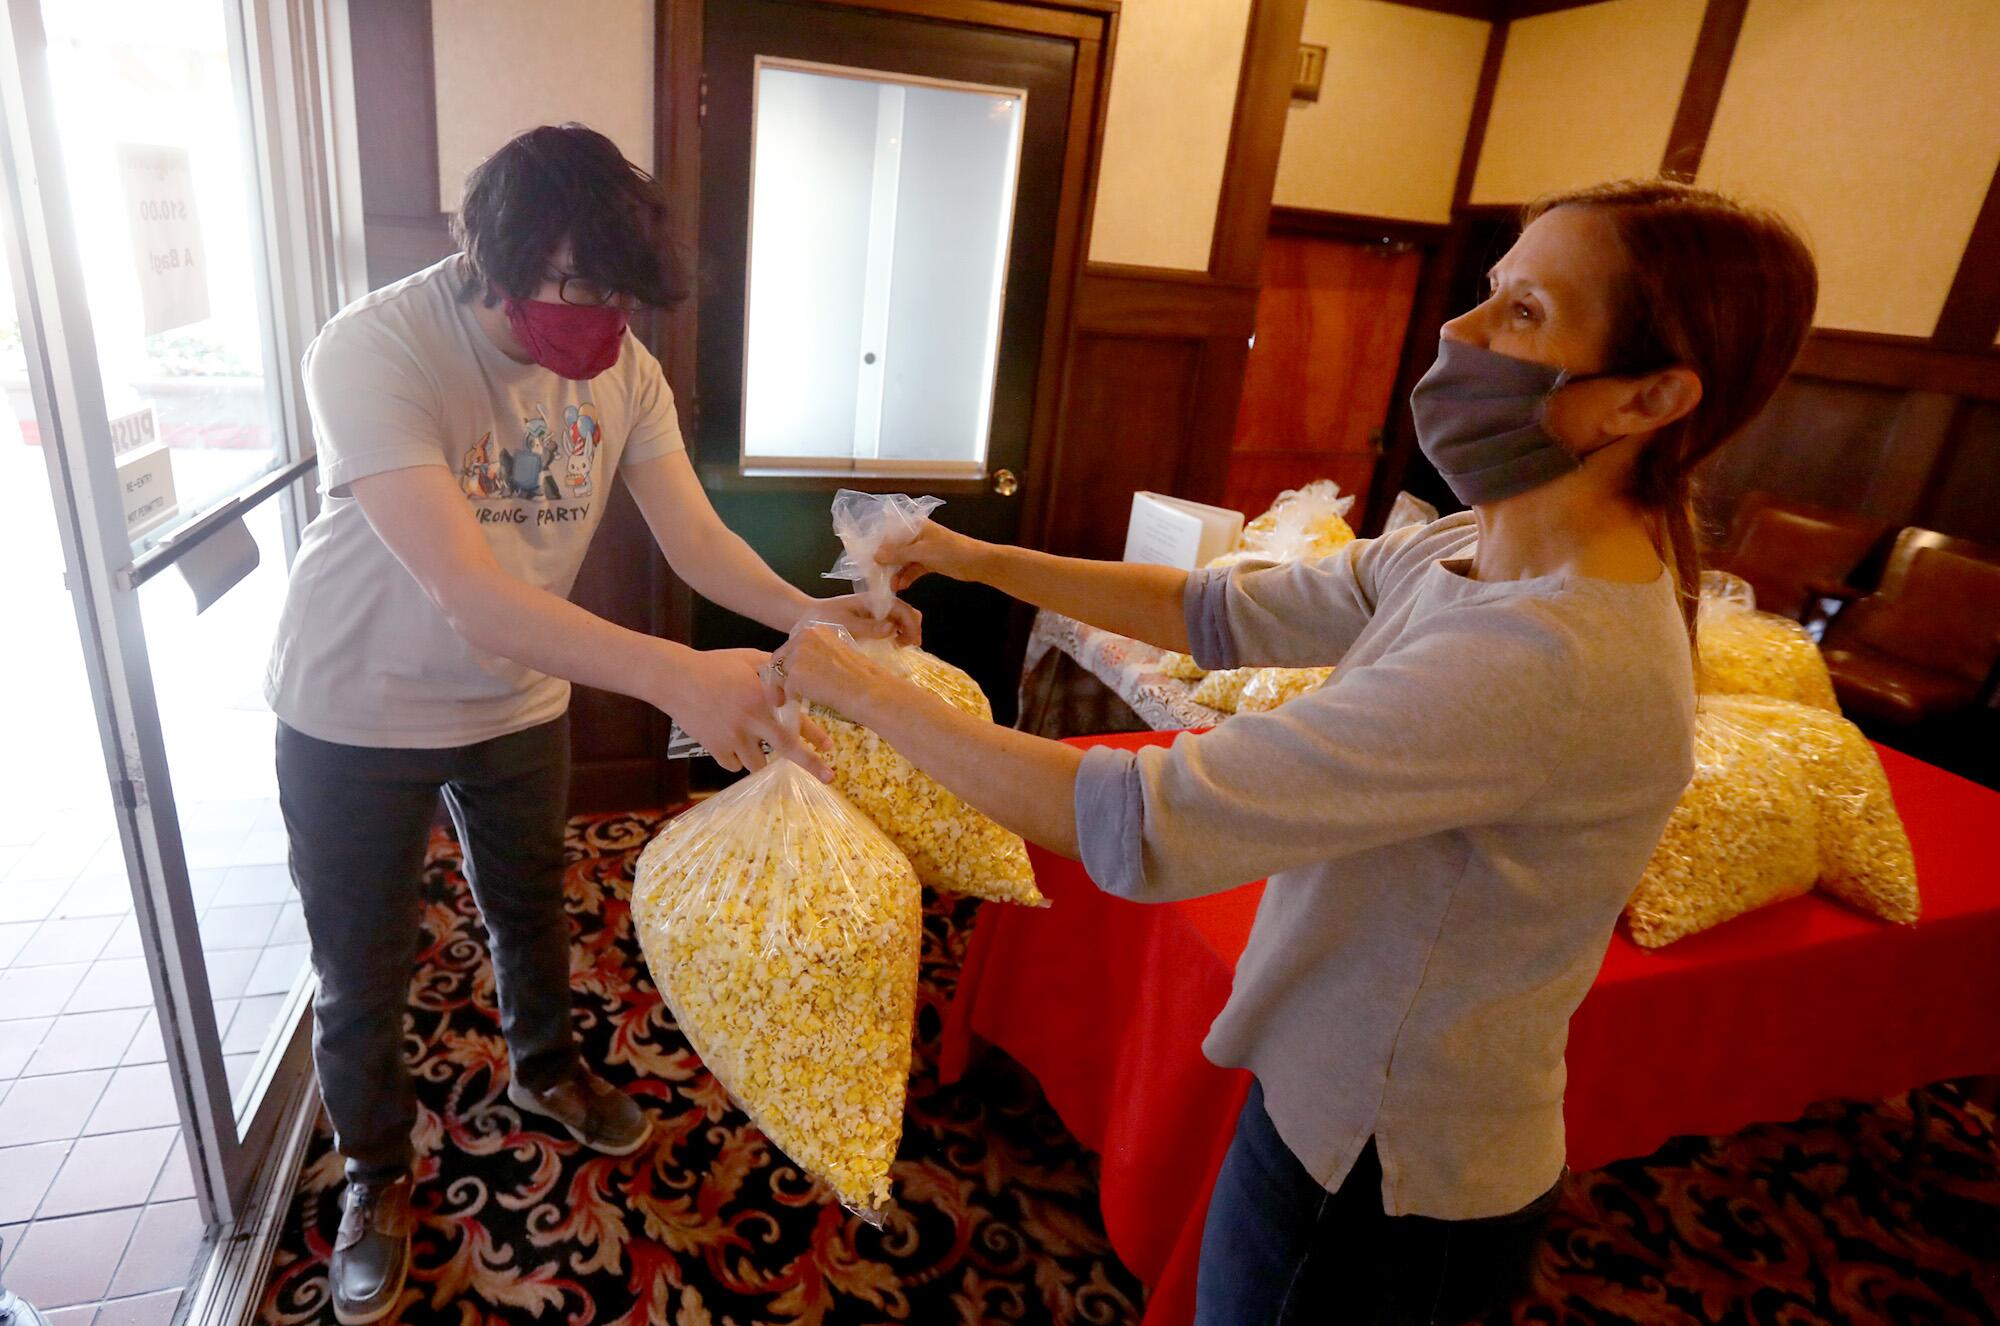 Bishop Theatre co-owner Holly Mullanix, right, serves up $10 bags of popcorn to a guest.